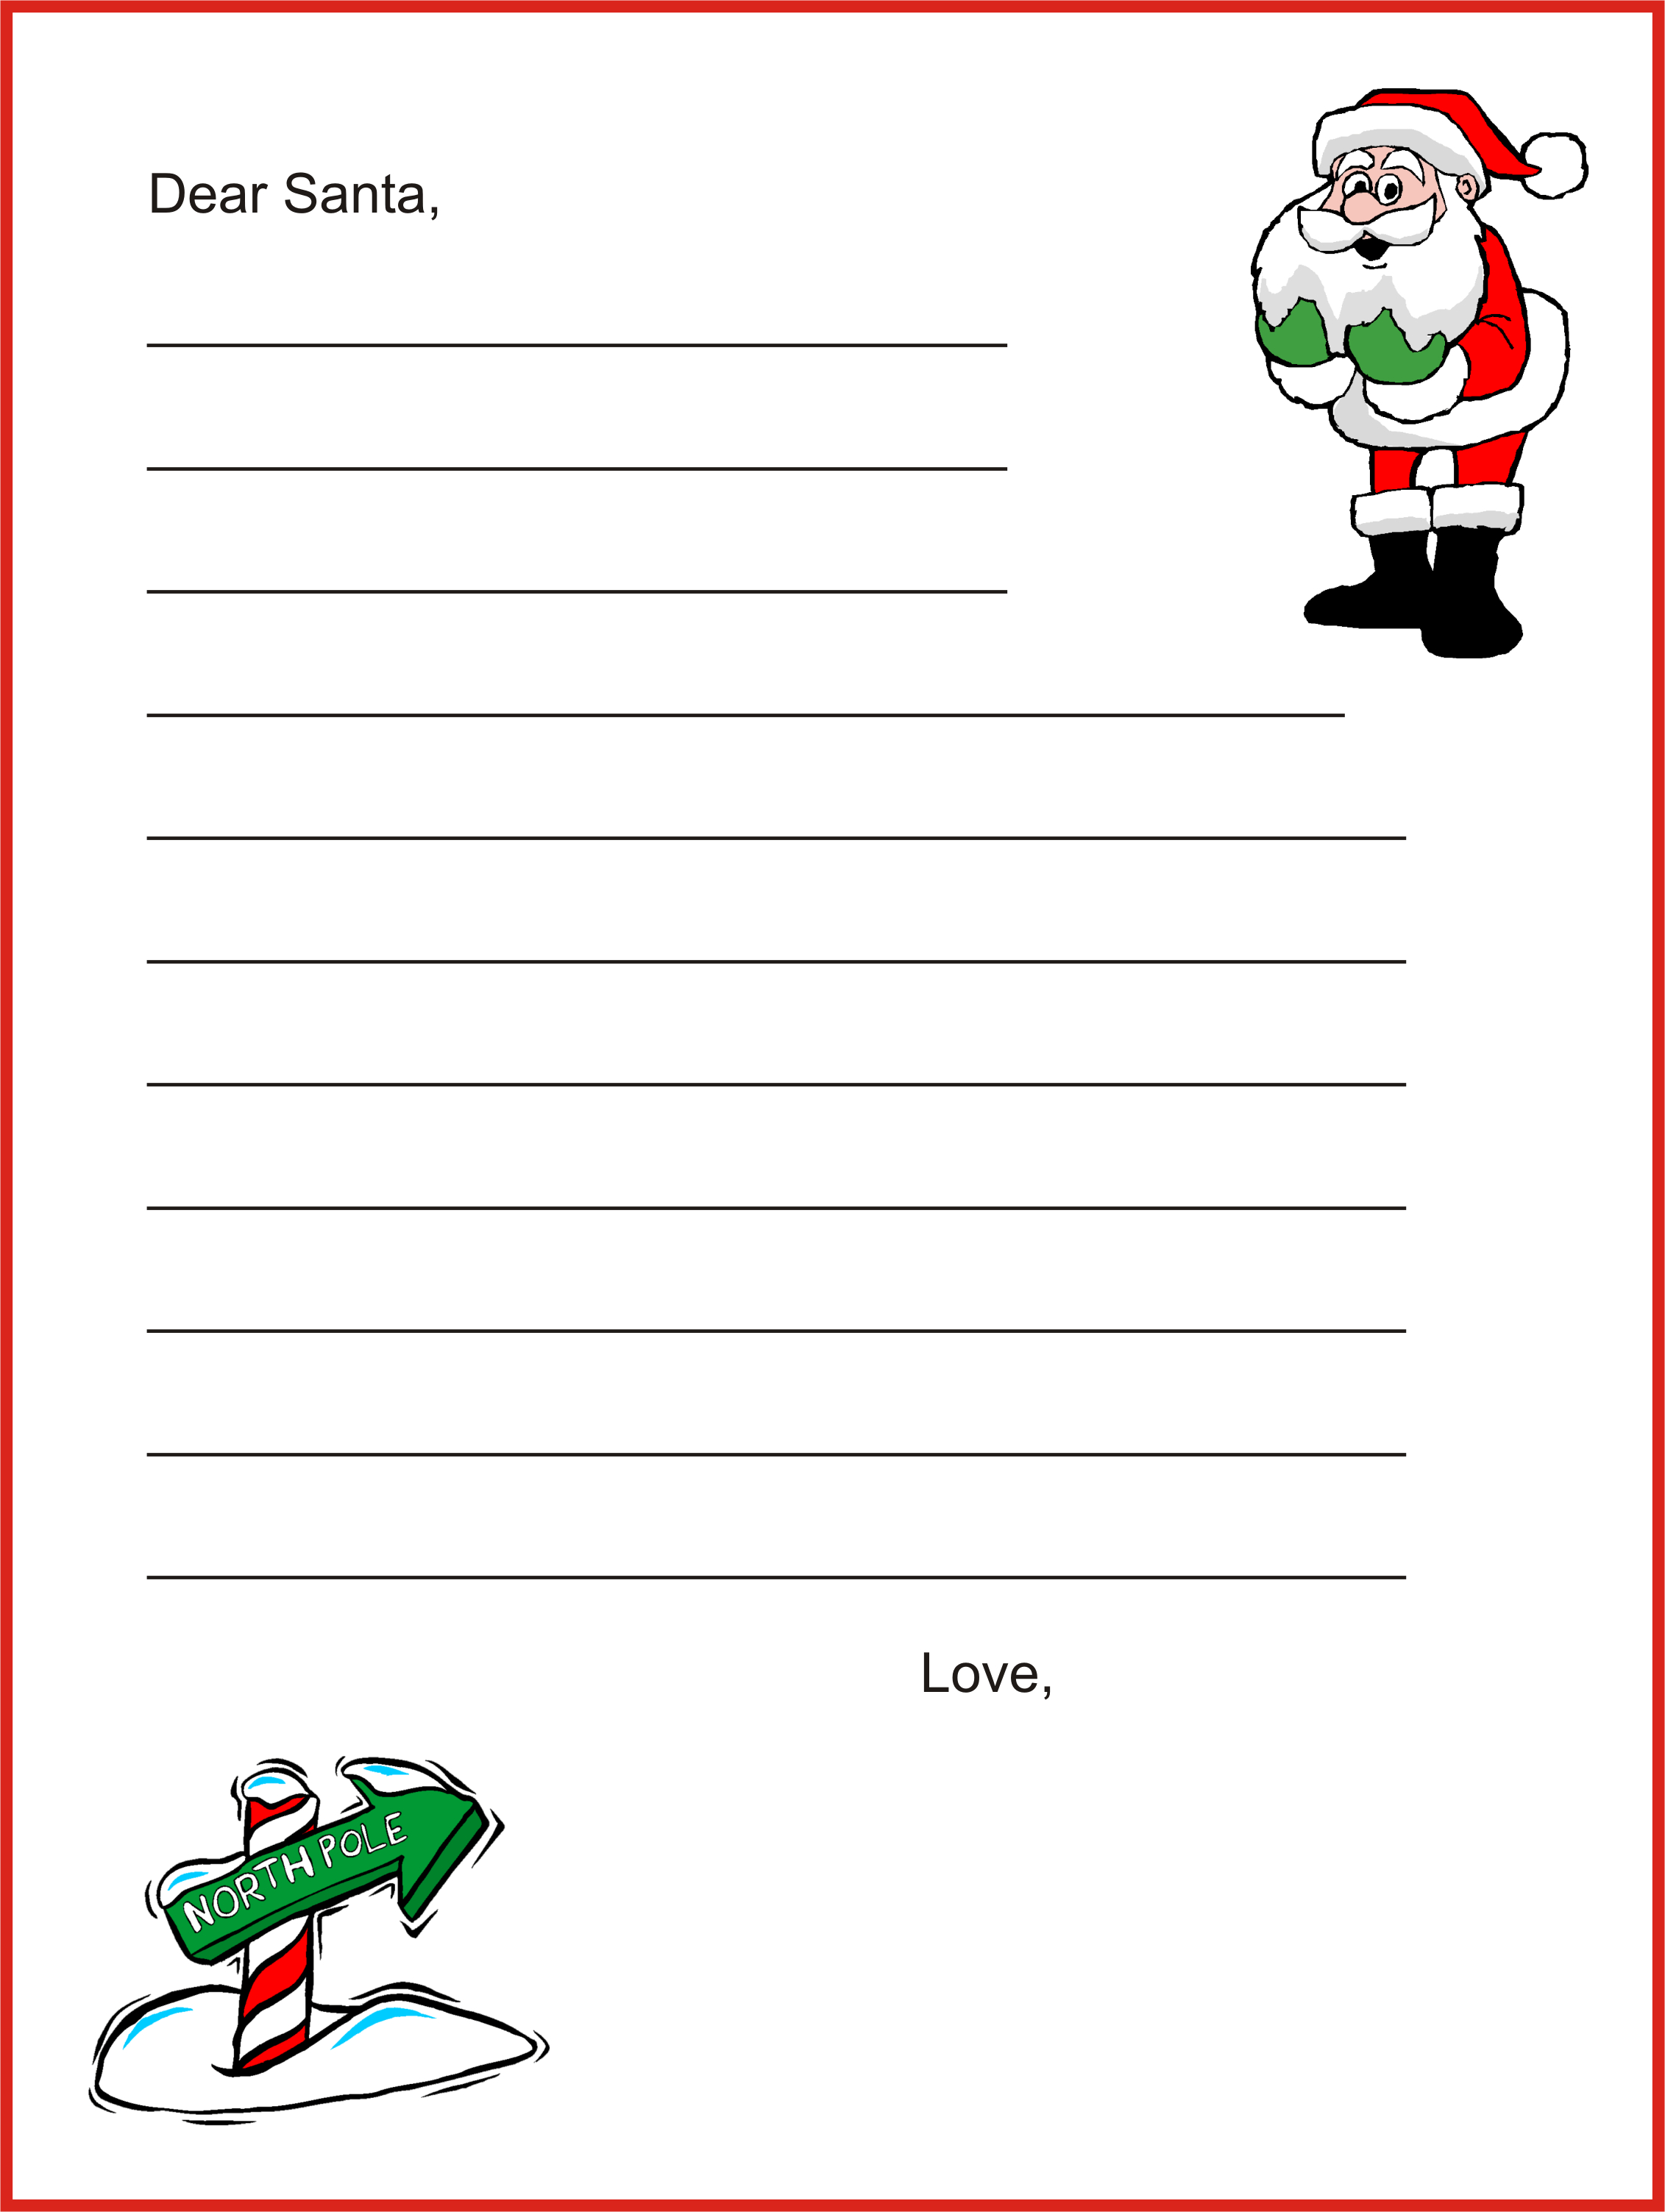 Document And Letter Templates.html